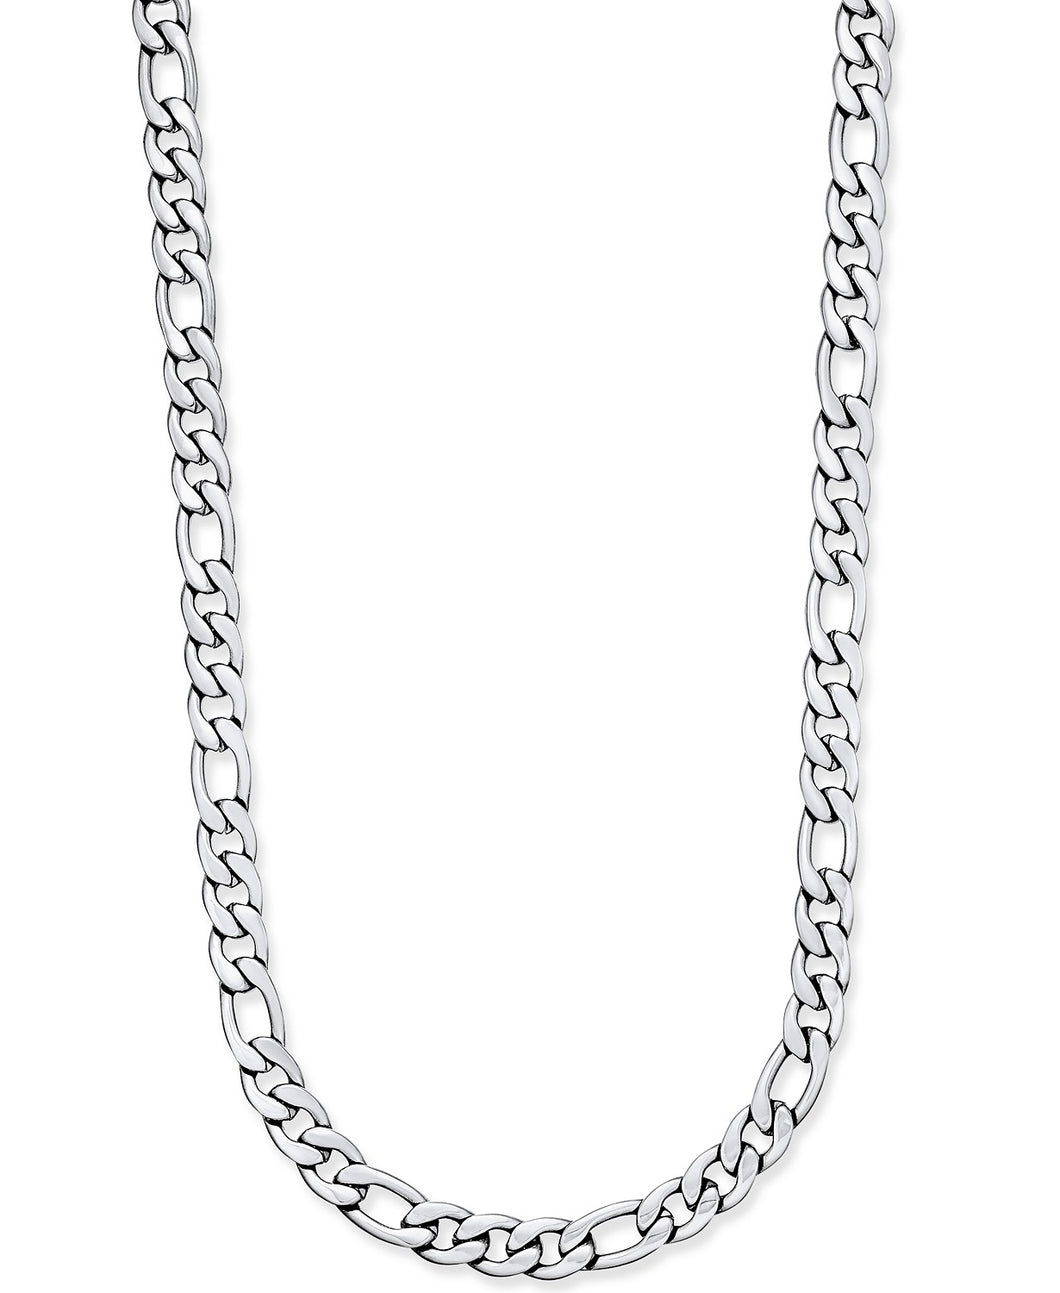 Men's Stainless Steel Necklace